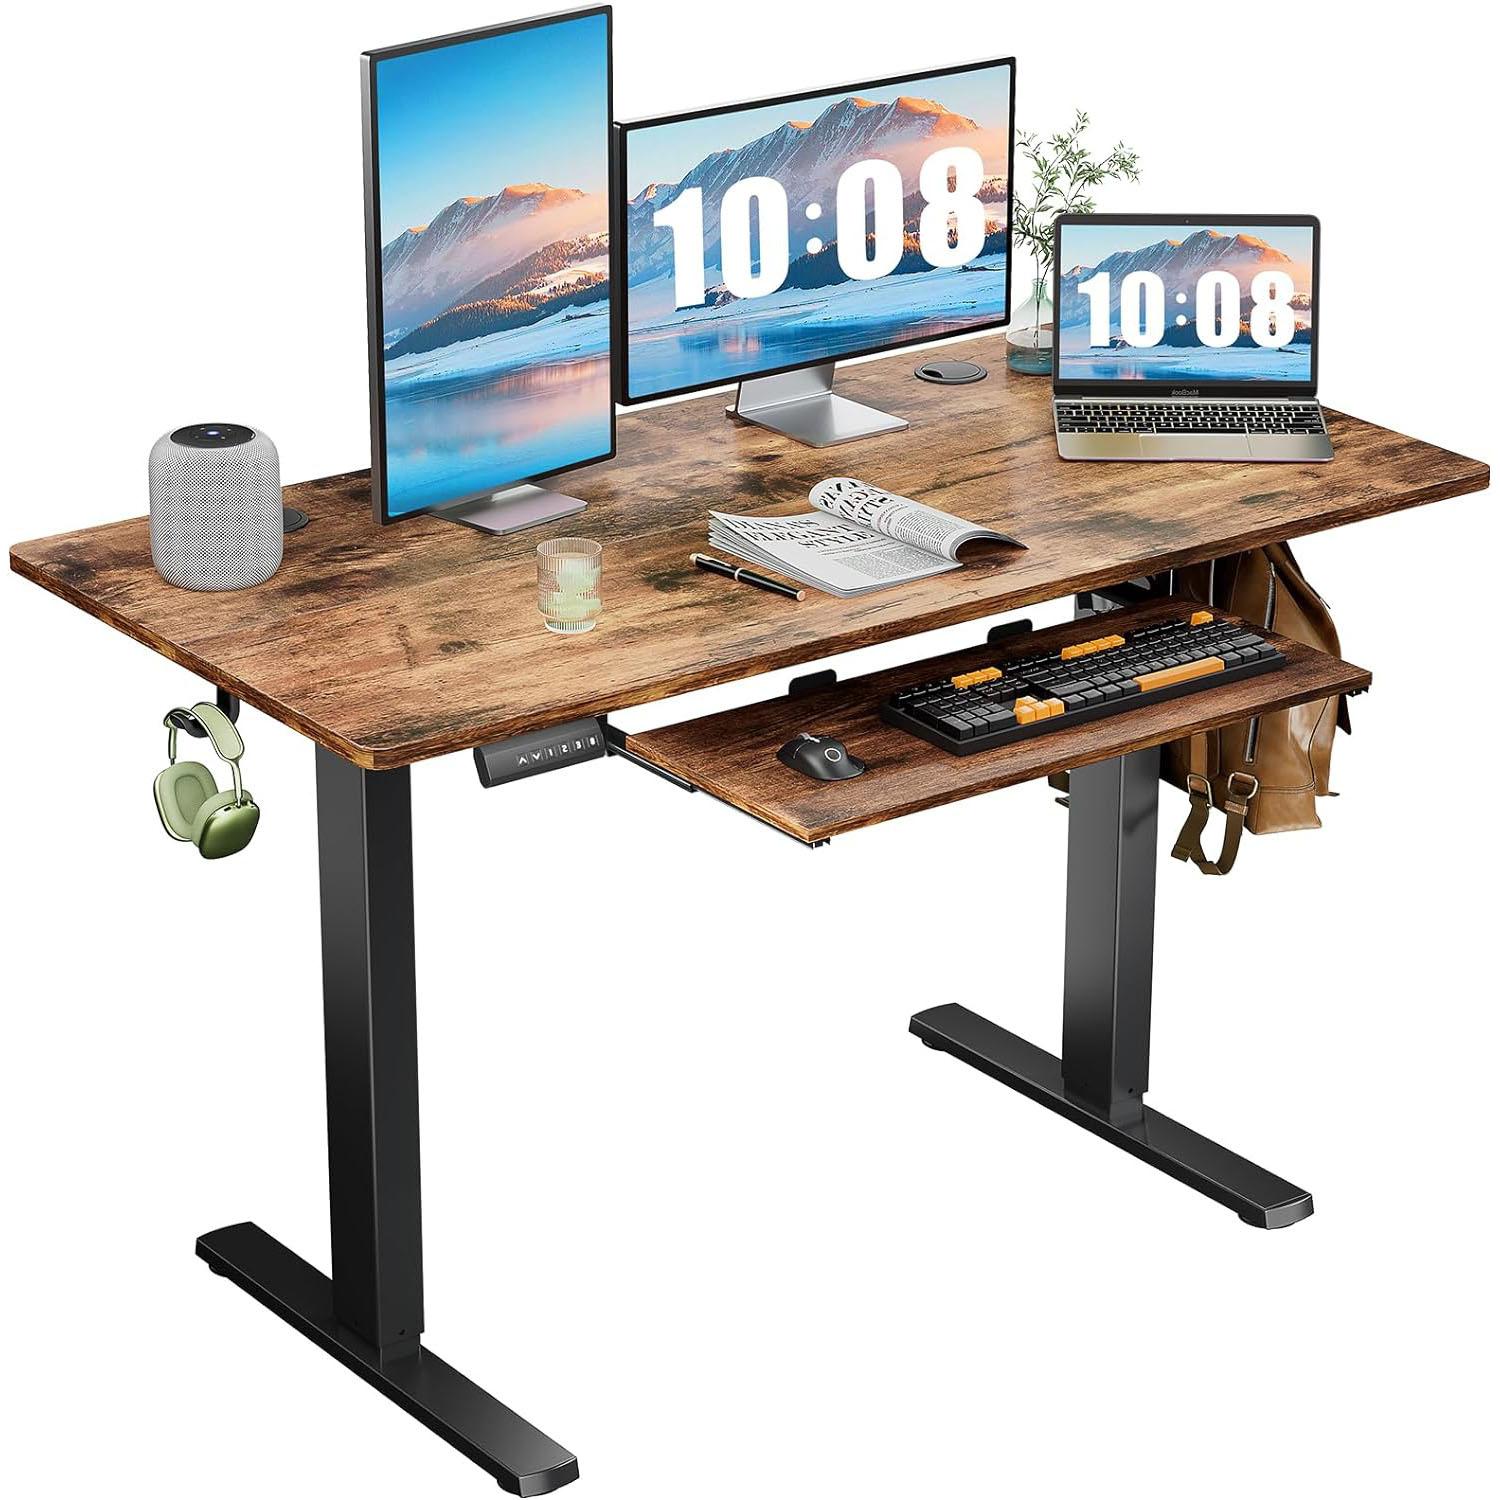 Standing Electric Adjustable Desk with Keyboard Tray for $79.47 Shipped